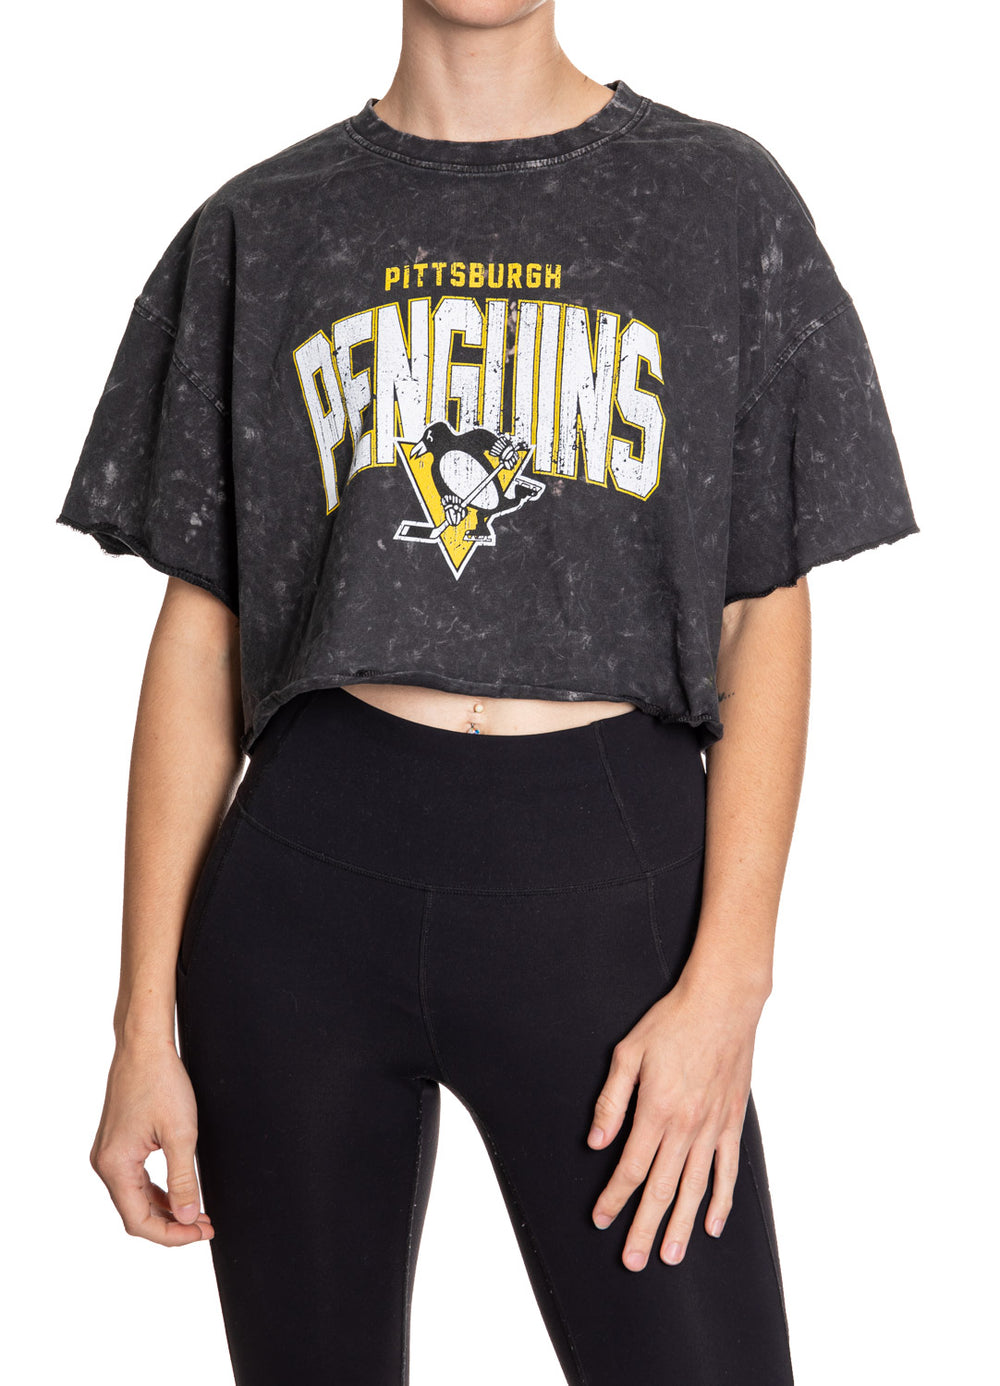 Woman standing in front of a white background wearing an oversized, black, acid wash crop top - featuring a Pittsburgh Penguins logo in the center of the shirt.